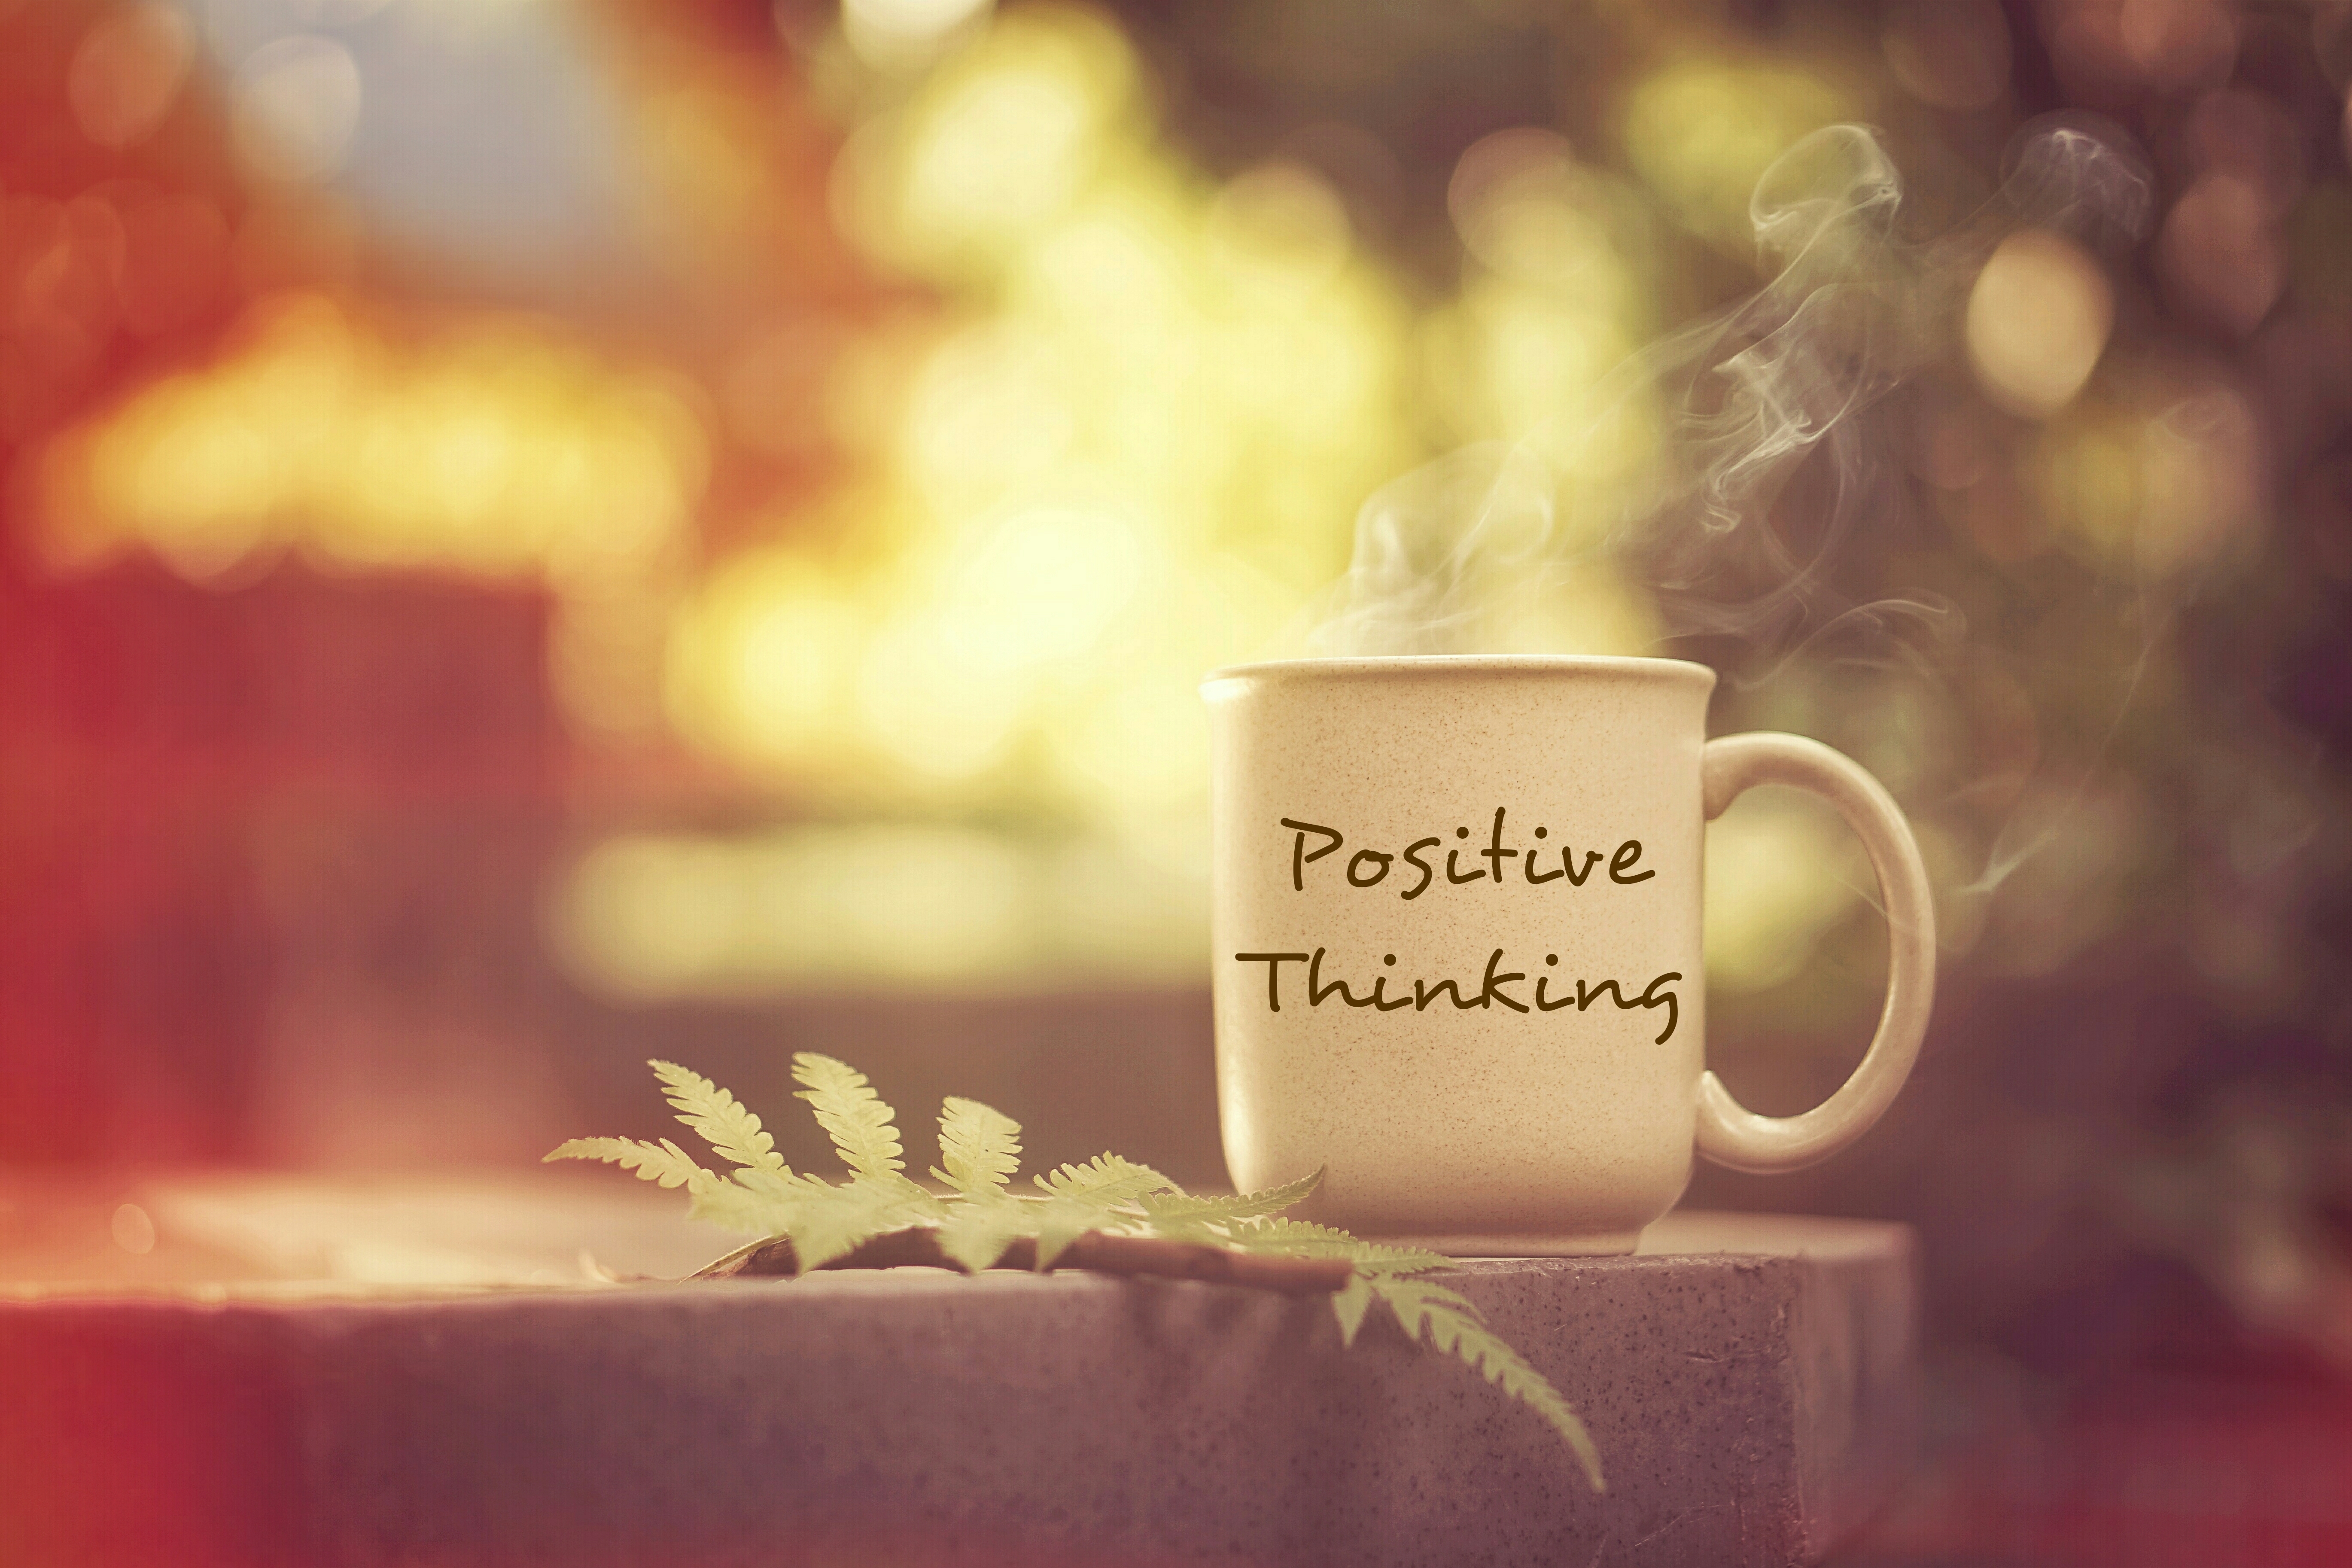 Positive thinking cup of tea